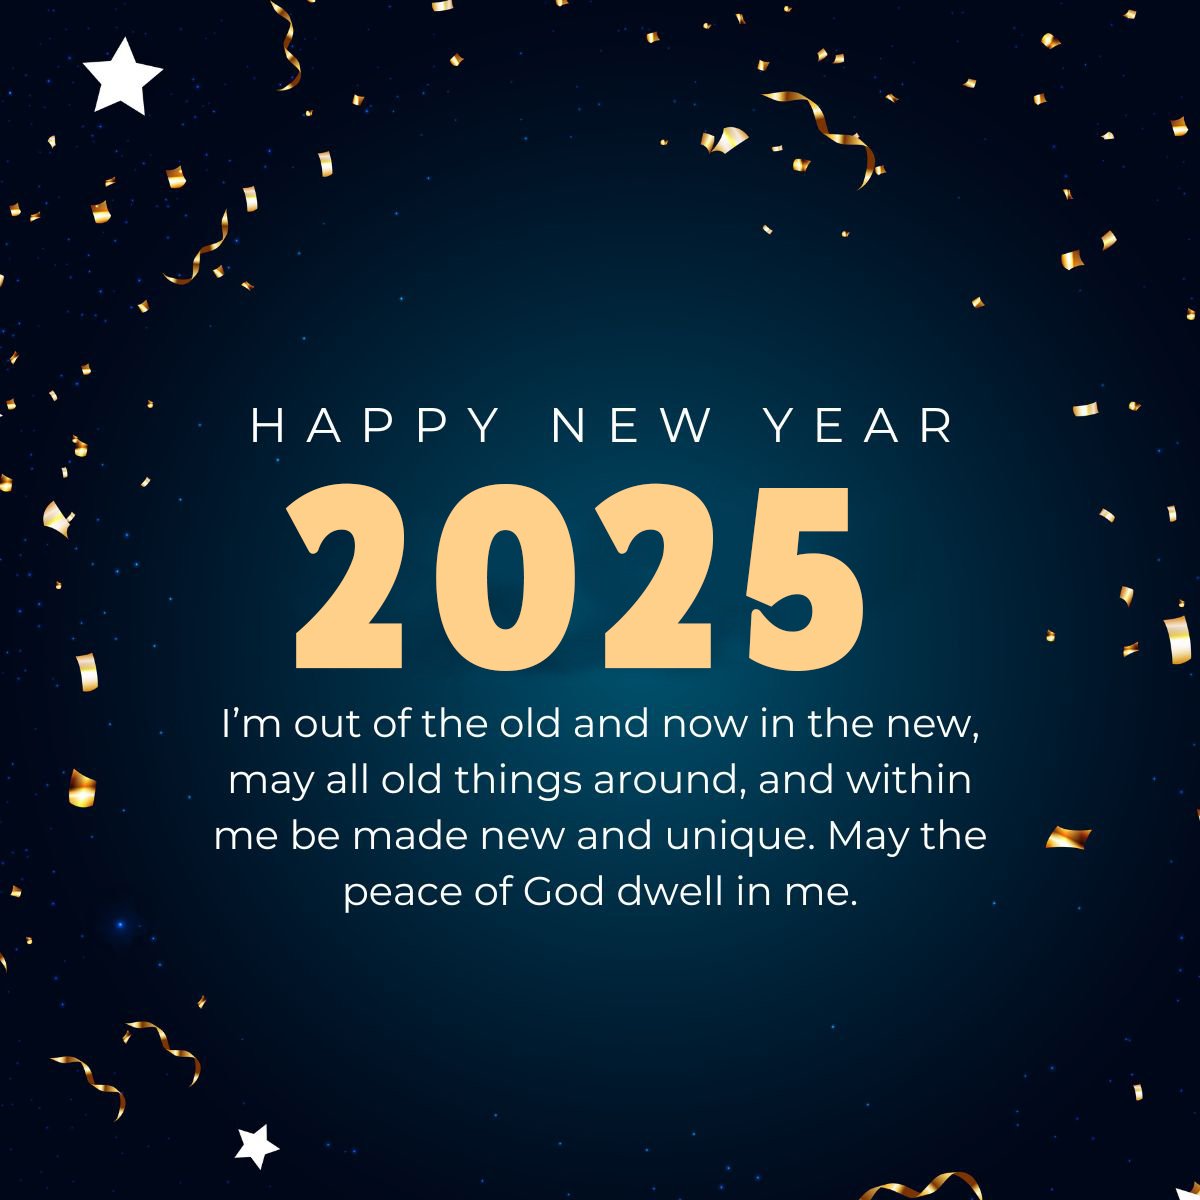 Simple Happy New Year Linkedln Post 2025